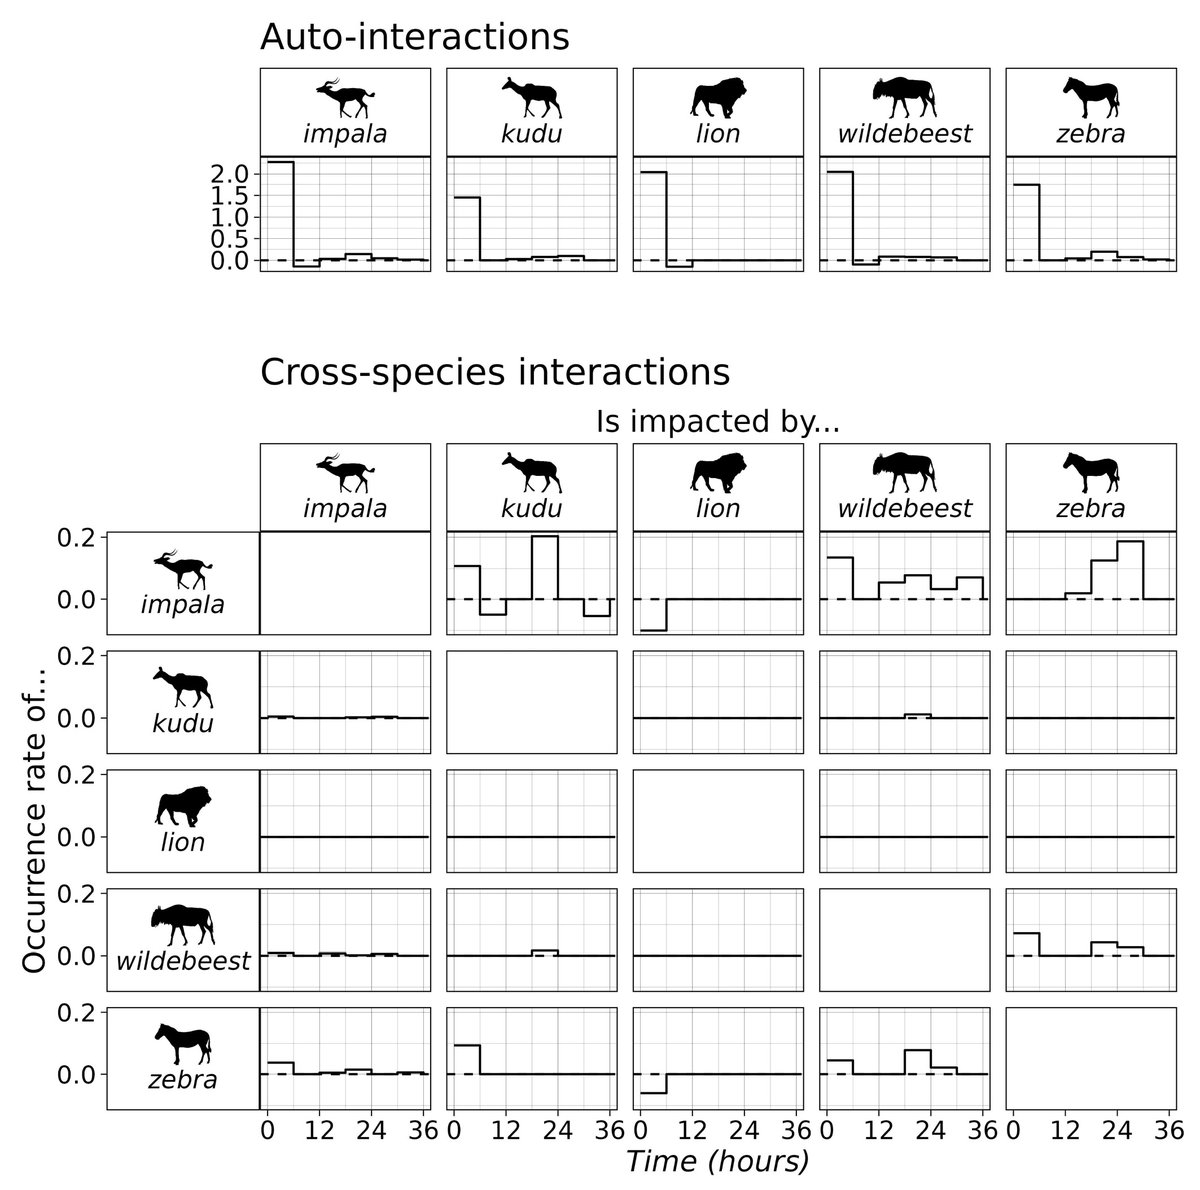 New in @ESAEcology: Applying the multivariate Hawkes process (originally developed to study earthquakes!) to #CameraTrap data reveals interspecific interactions among savanna predators & prey doi.org/10.1002/ecy.42… W/ #OpenData on @figshare @lisanicvert @JanBuffel @UPWildlife